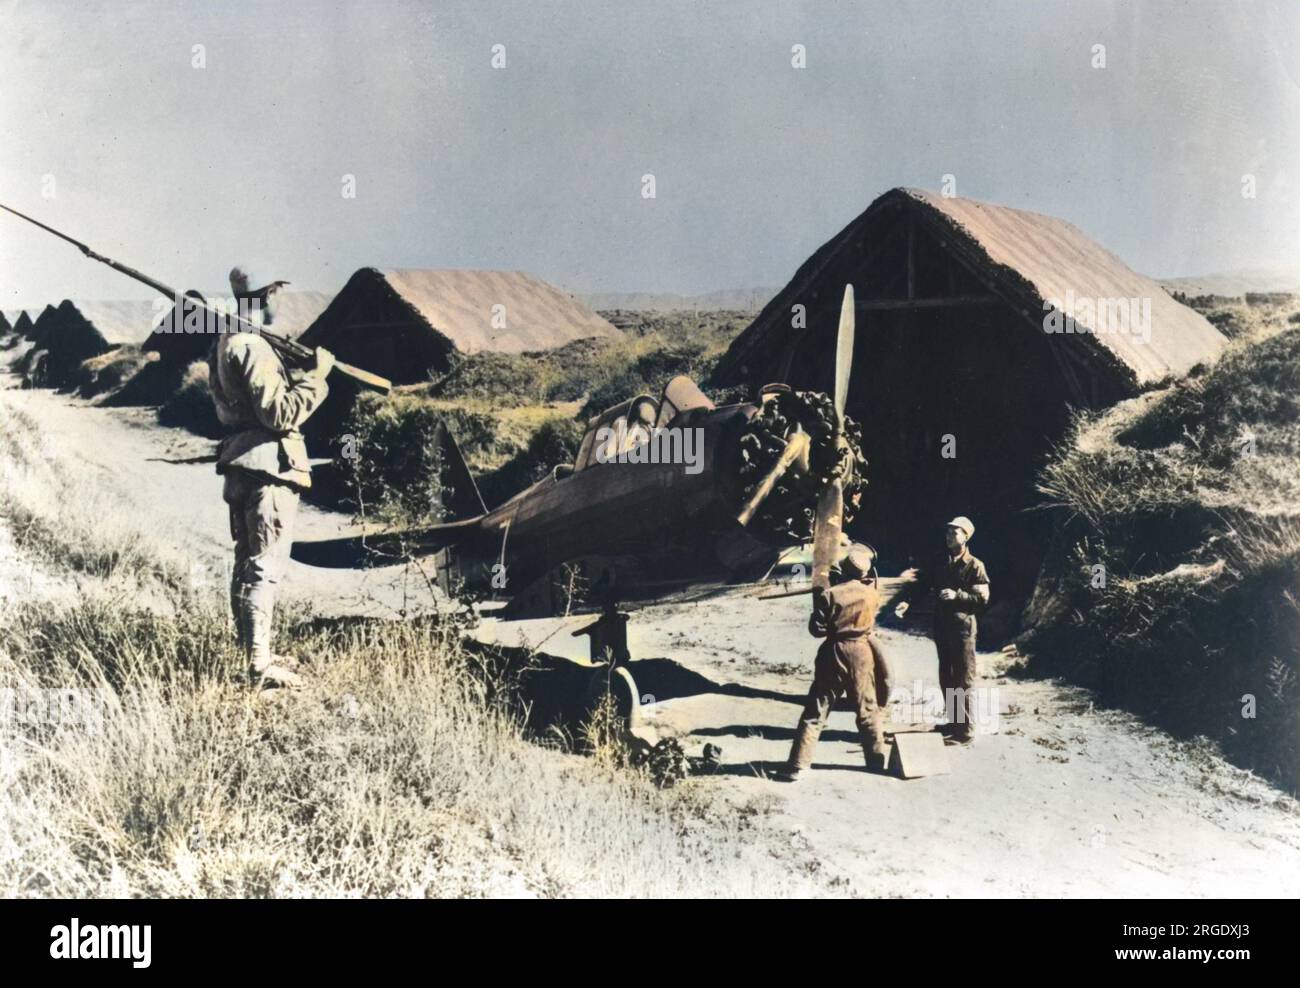 With a Chinese soldier standing guard, repair work on a U.S. fighter plane is carried out somewhere in China. The camouflaged huts in the background act as cover for the American planes Stock Photo